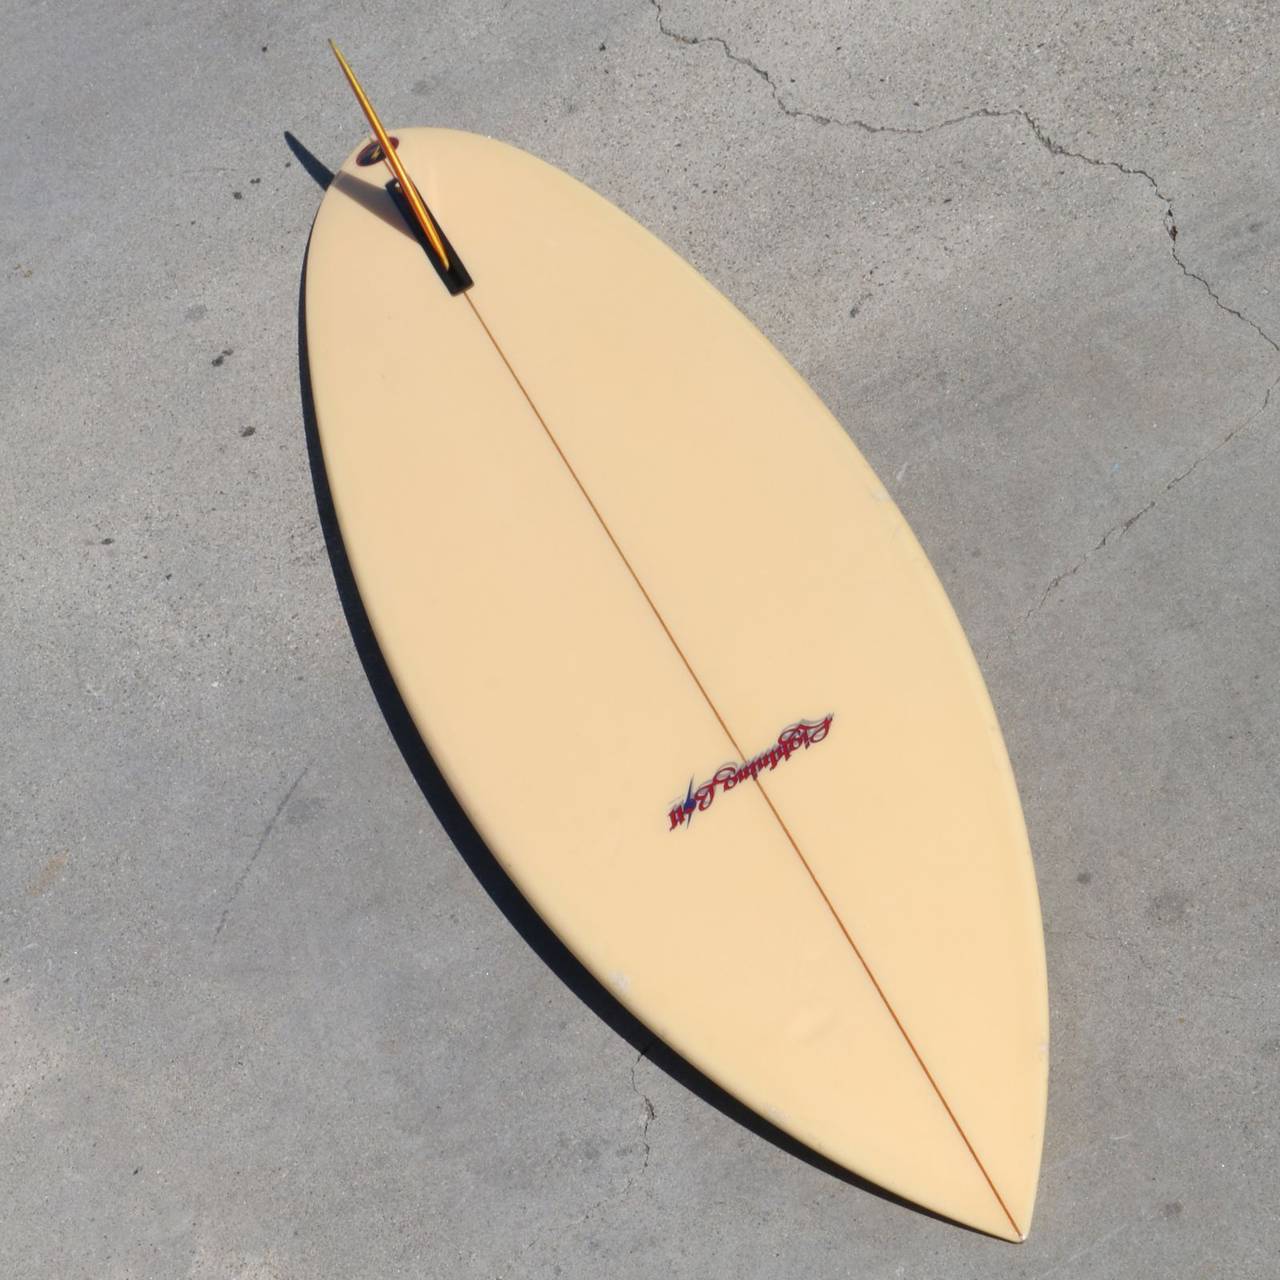 Mid-Century Modern Rare and Beautiful Bobby Owens Lightning Bolt Surfboard, Late 1970s